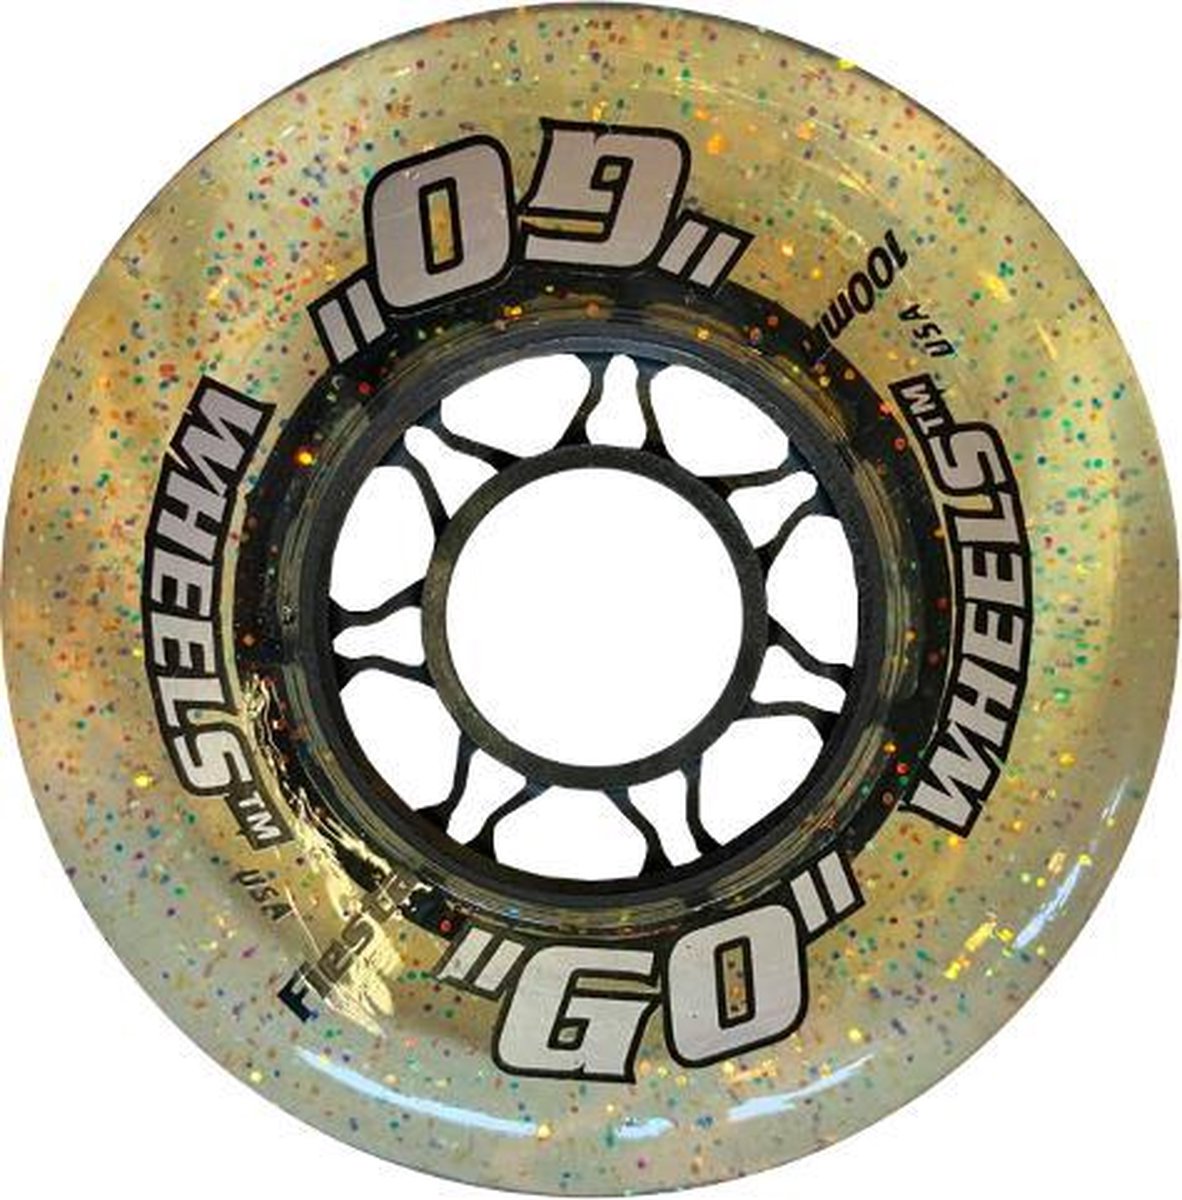 Go Wheels - Stepwielen - 2-Pack - 100 mm - Transparant - One Size